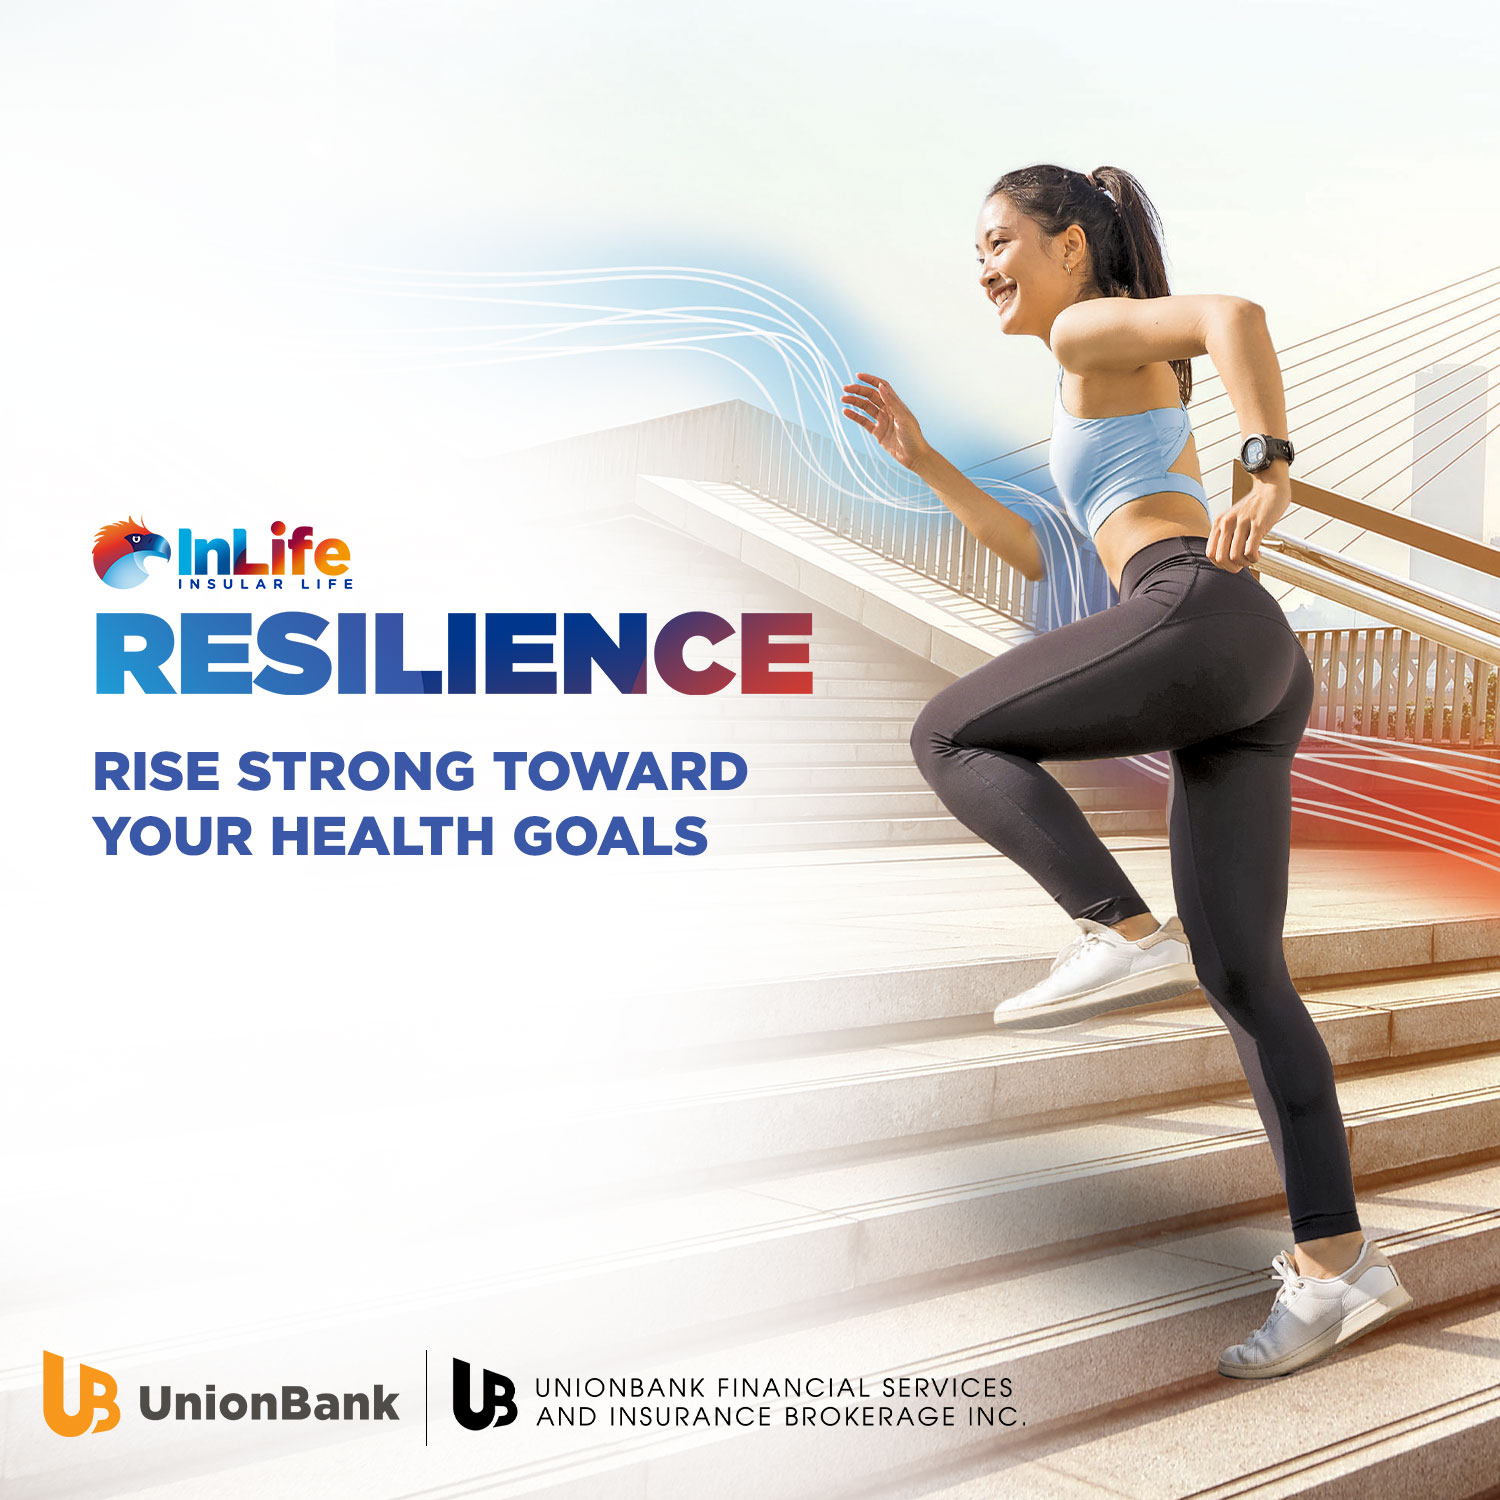 InLife’s critical illness plan “Resilience” now available in UnionBank and UFSI